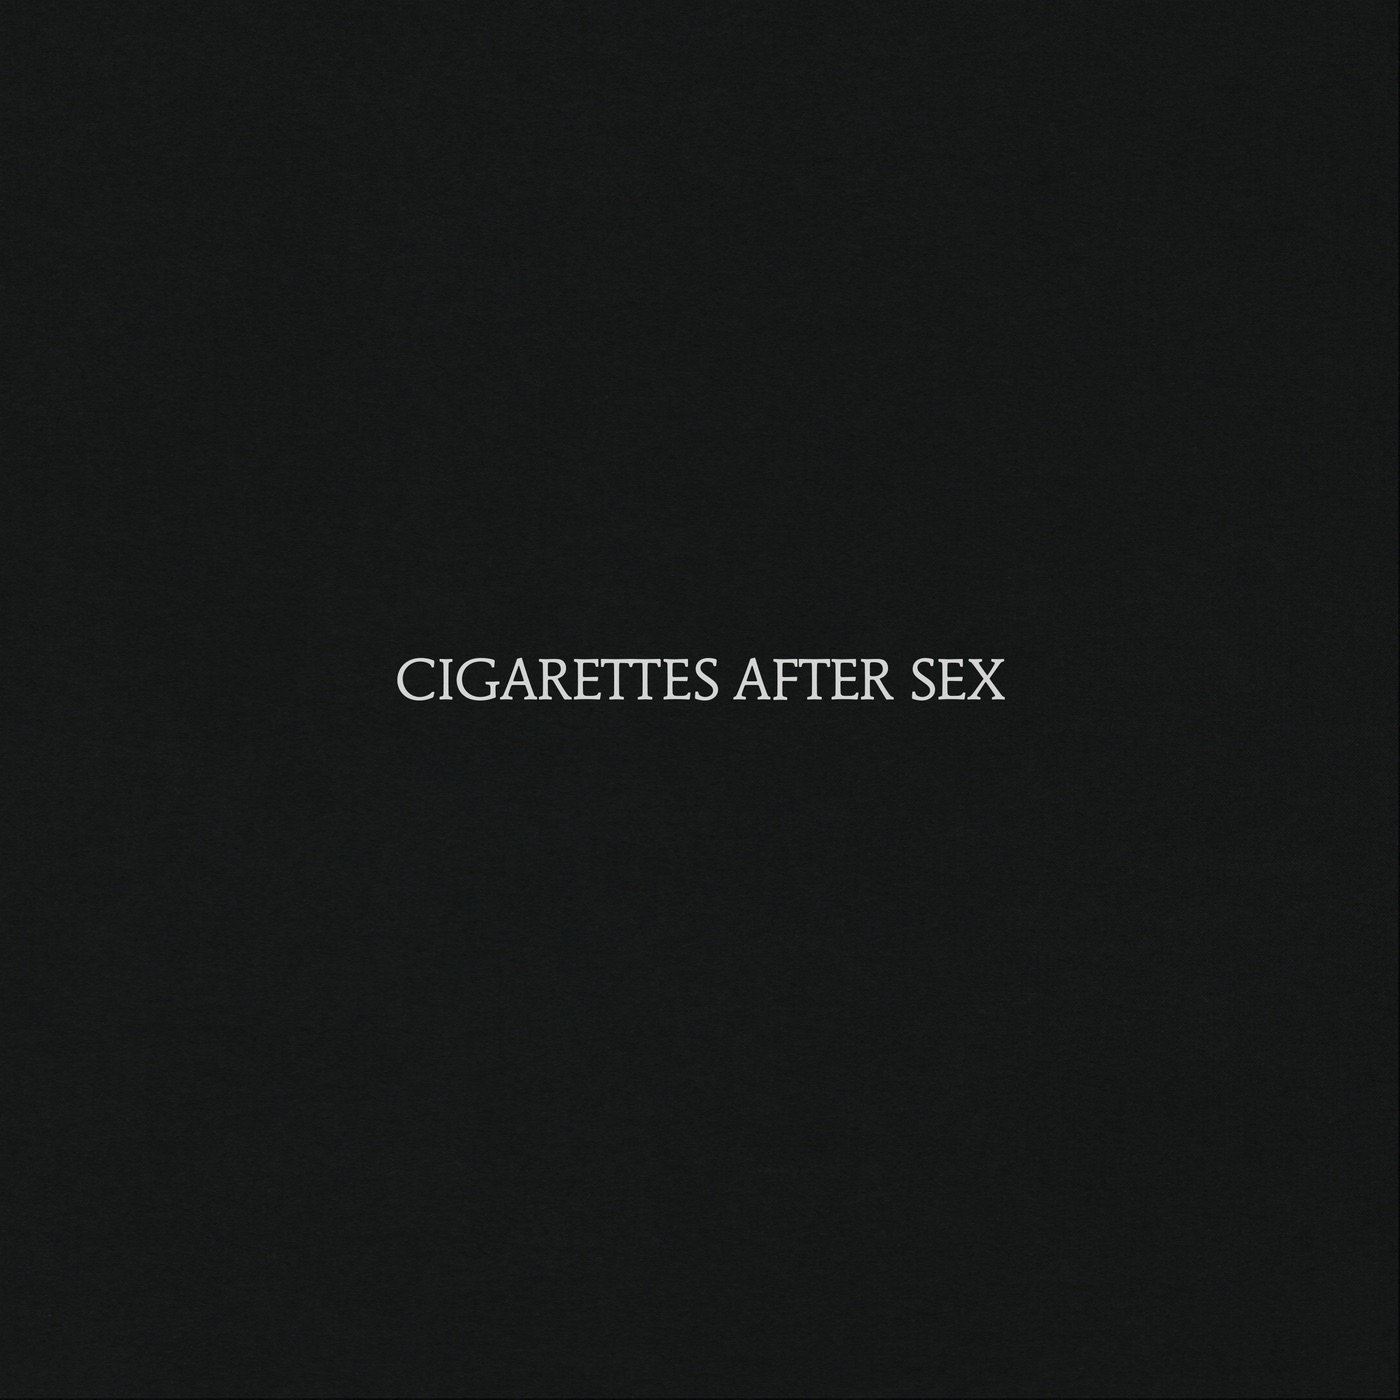 Cigarettes After Sex by Cigarettes After Sex